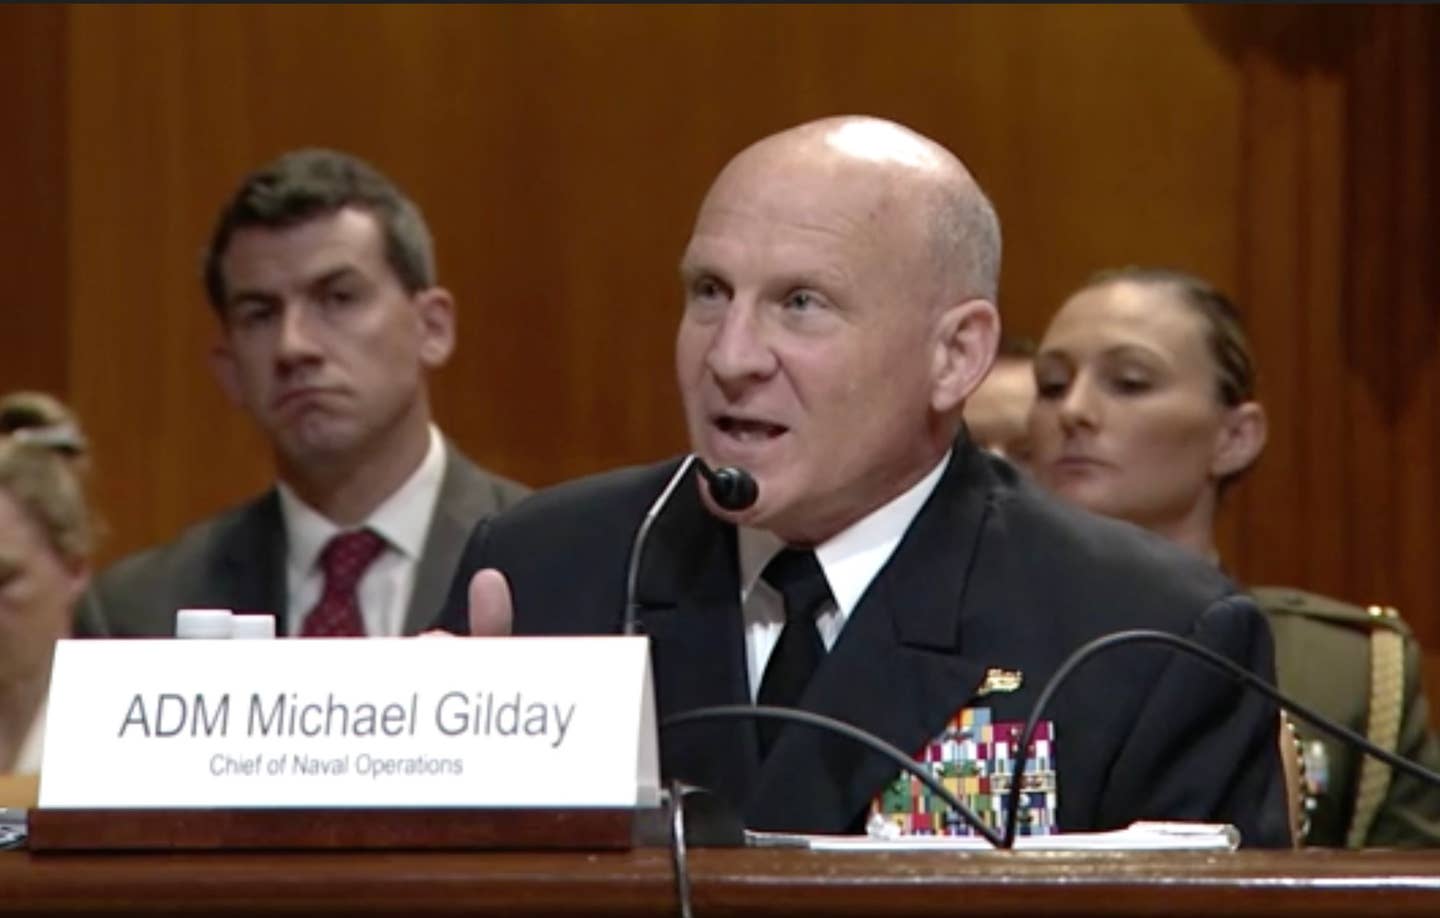 Admiral Michael Gilday speaking at the Sub-Committee hearing on May 26. <em>United States Senate Committee on Appropriations.</em>